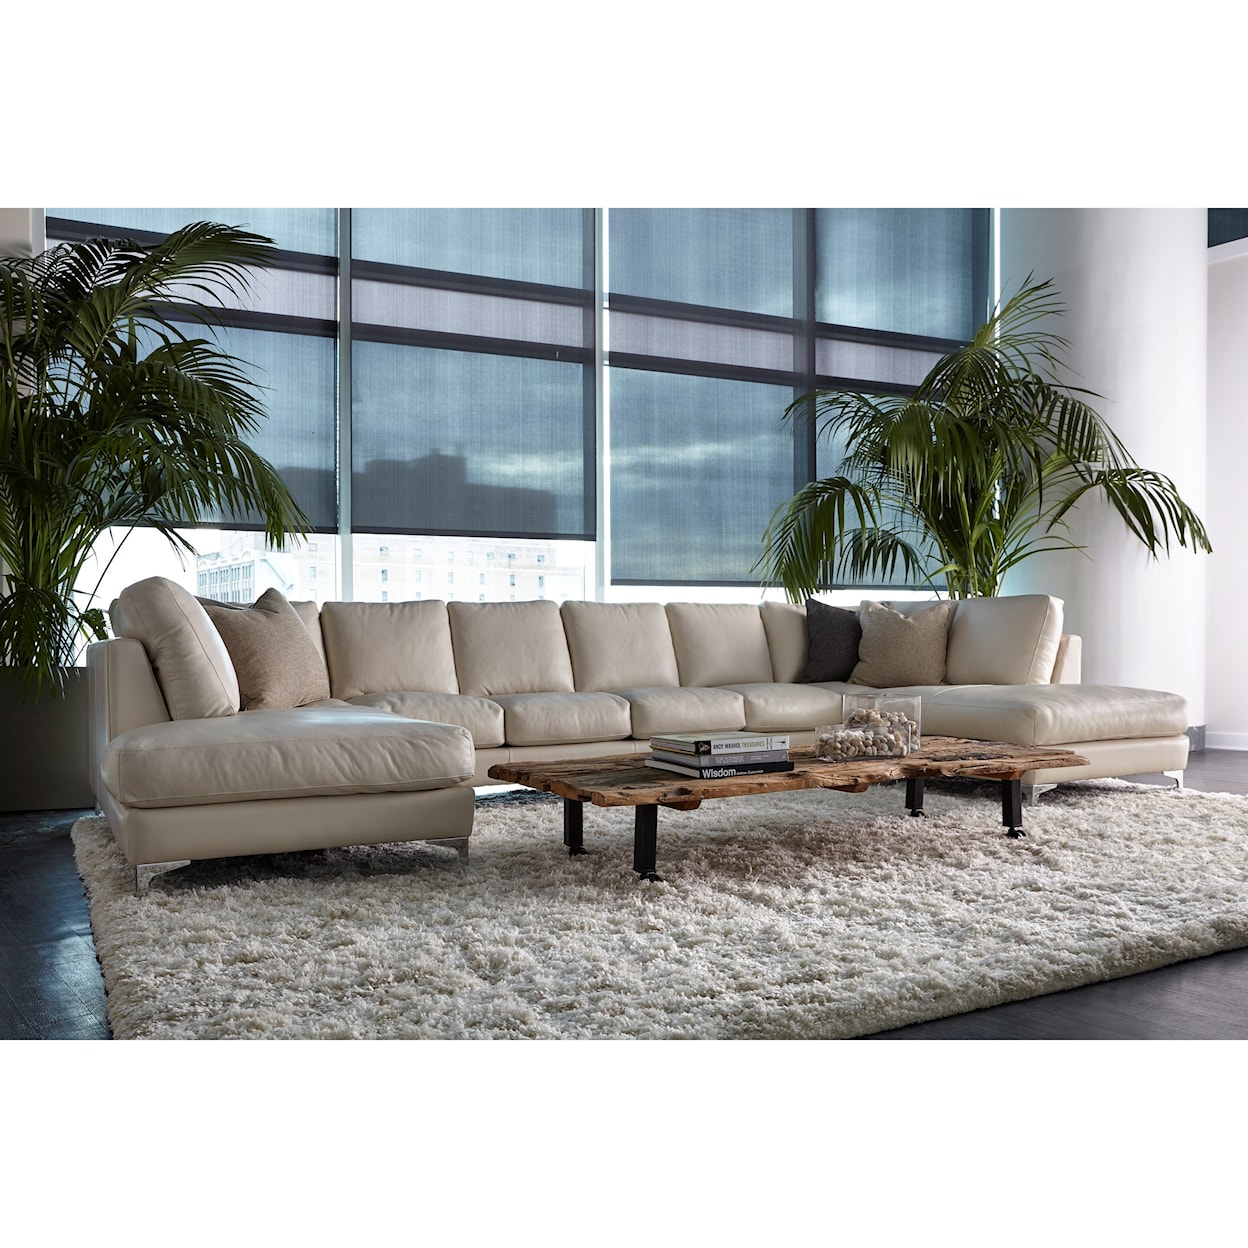 American Leather Kendall 6-Seat U-Shape Sectional